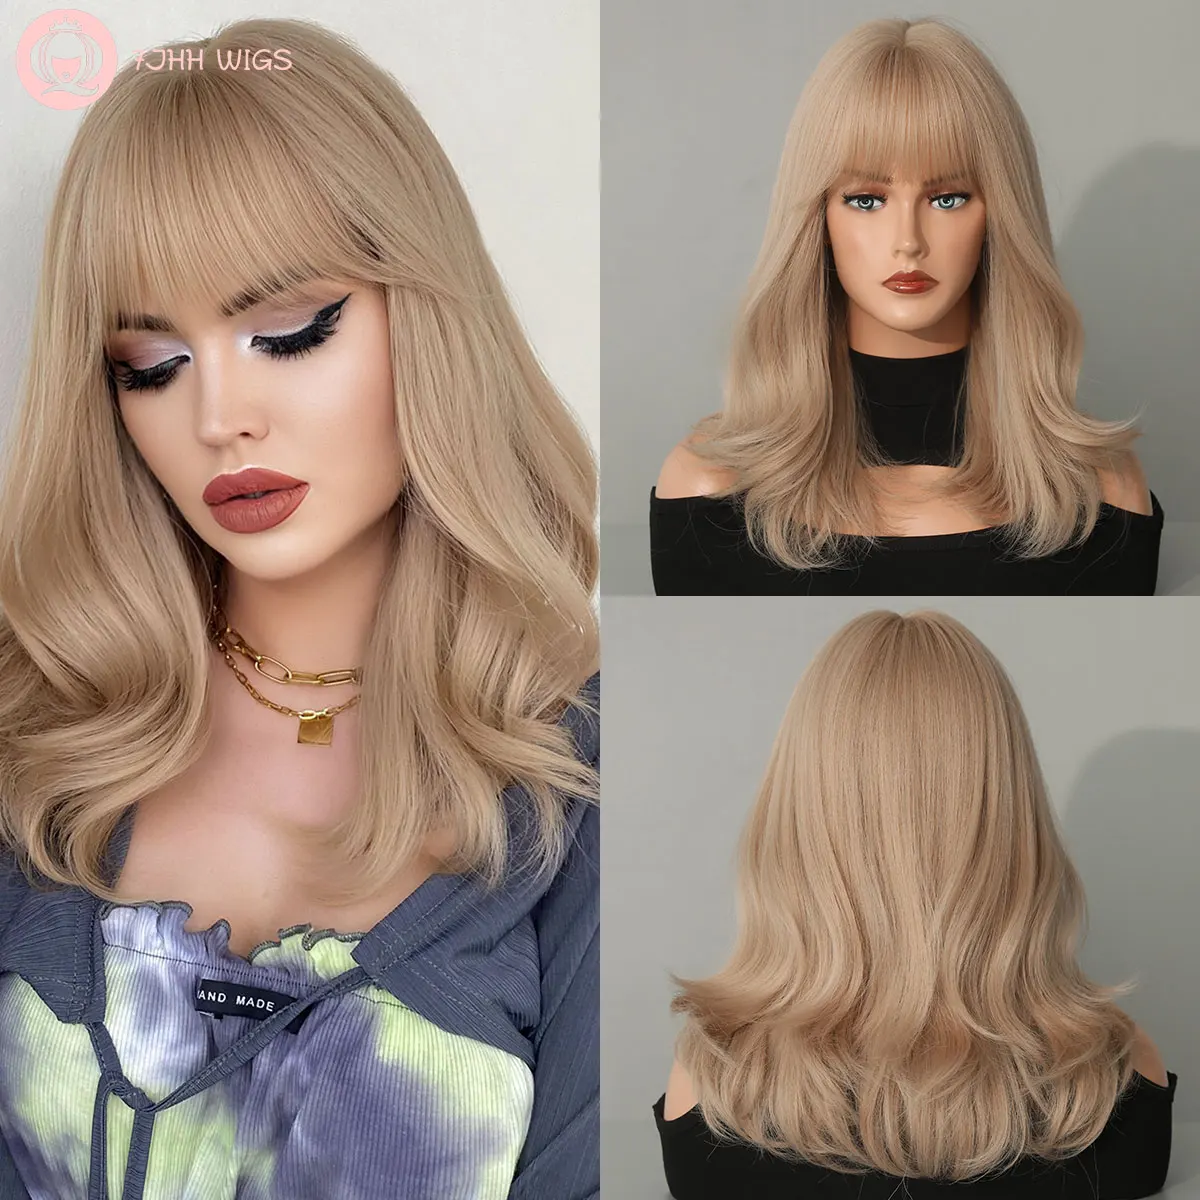 7JHH WIGS Honey Blonde Wig for Woman Daily Cosplay Natural Medium and Long Synthetic Hair Wigs with Bangs Heat Resistant Fiber bubuwig synthetic hair genshin impact klee cosplay wigs women 35cm medium long straight light blonde ponytail wig heat resistant